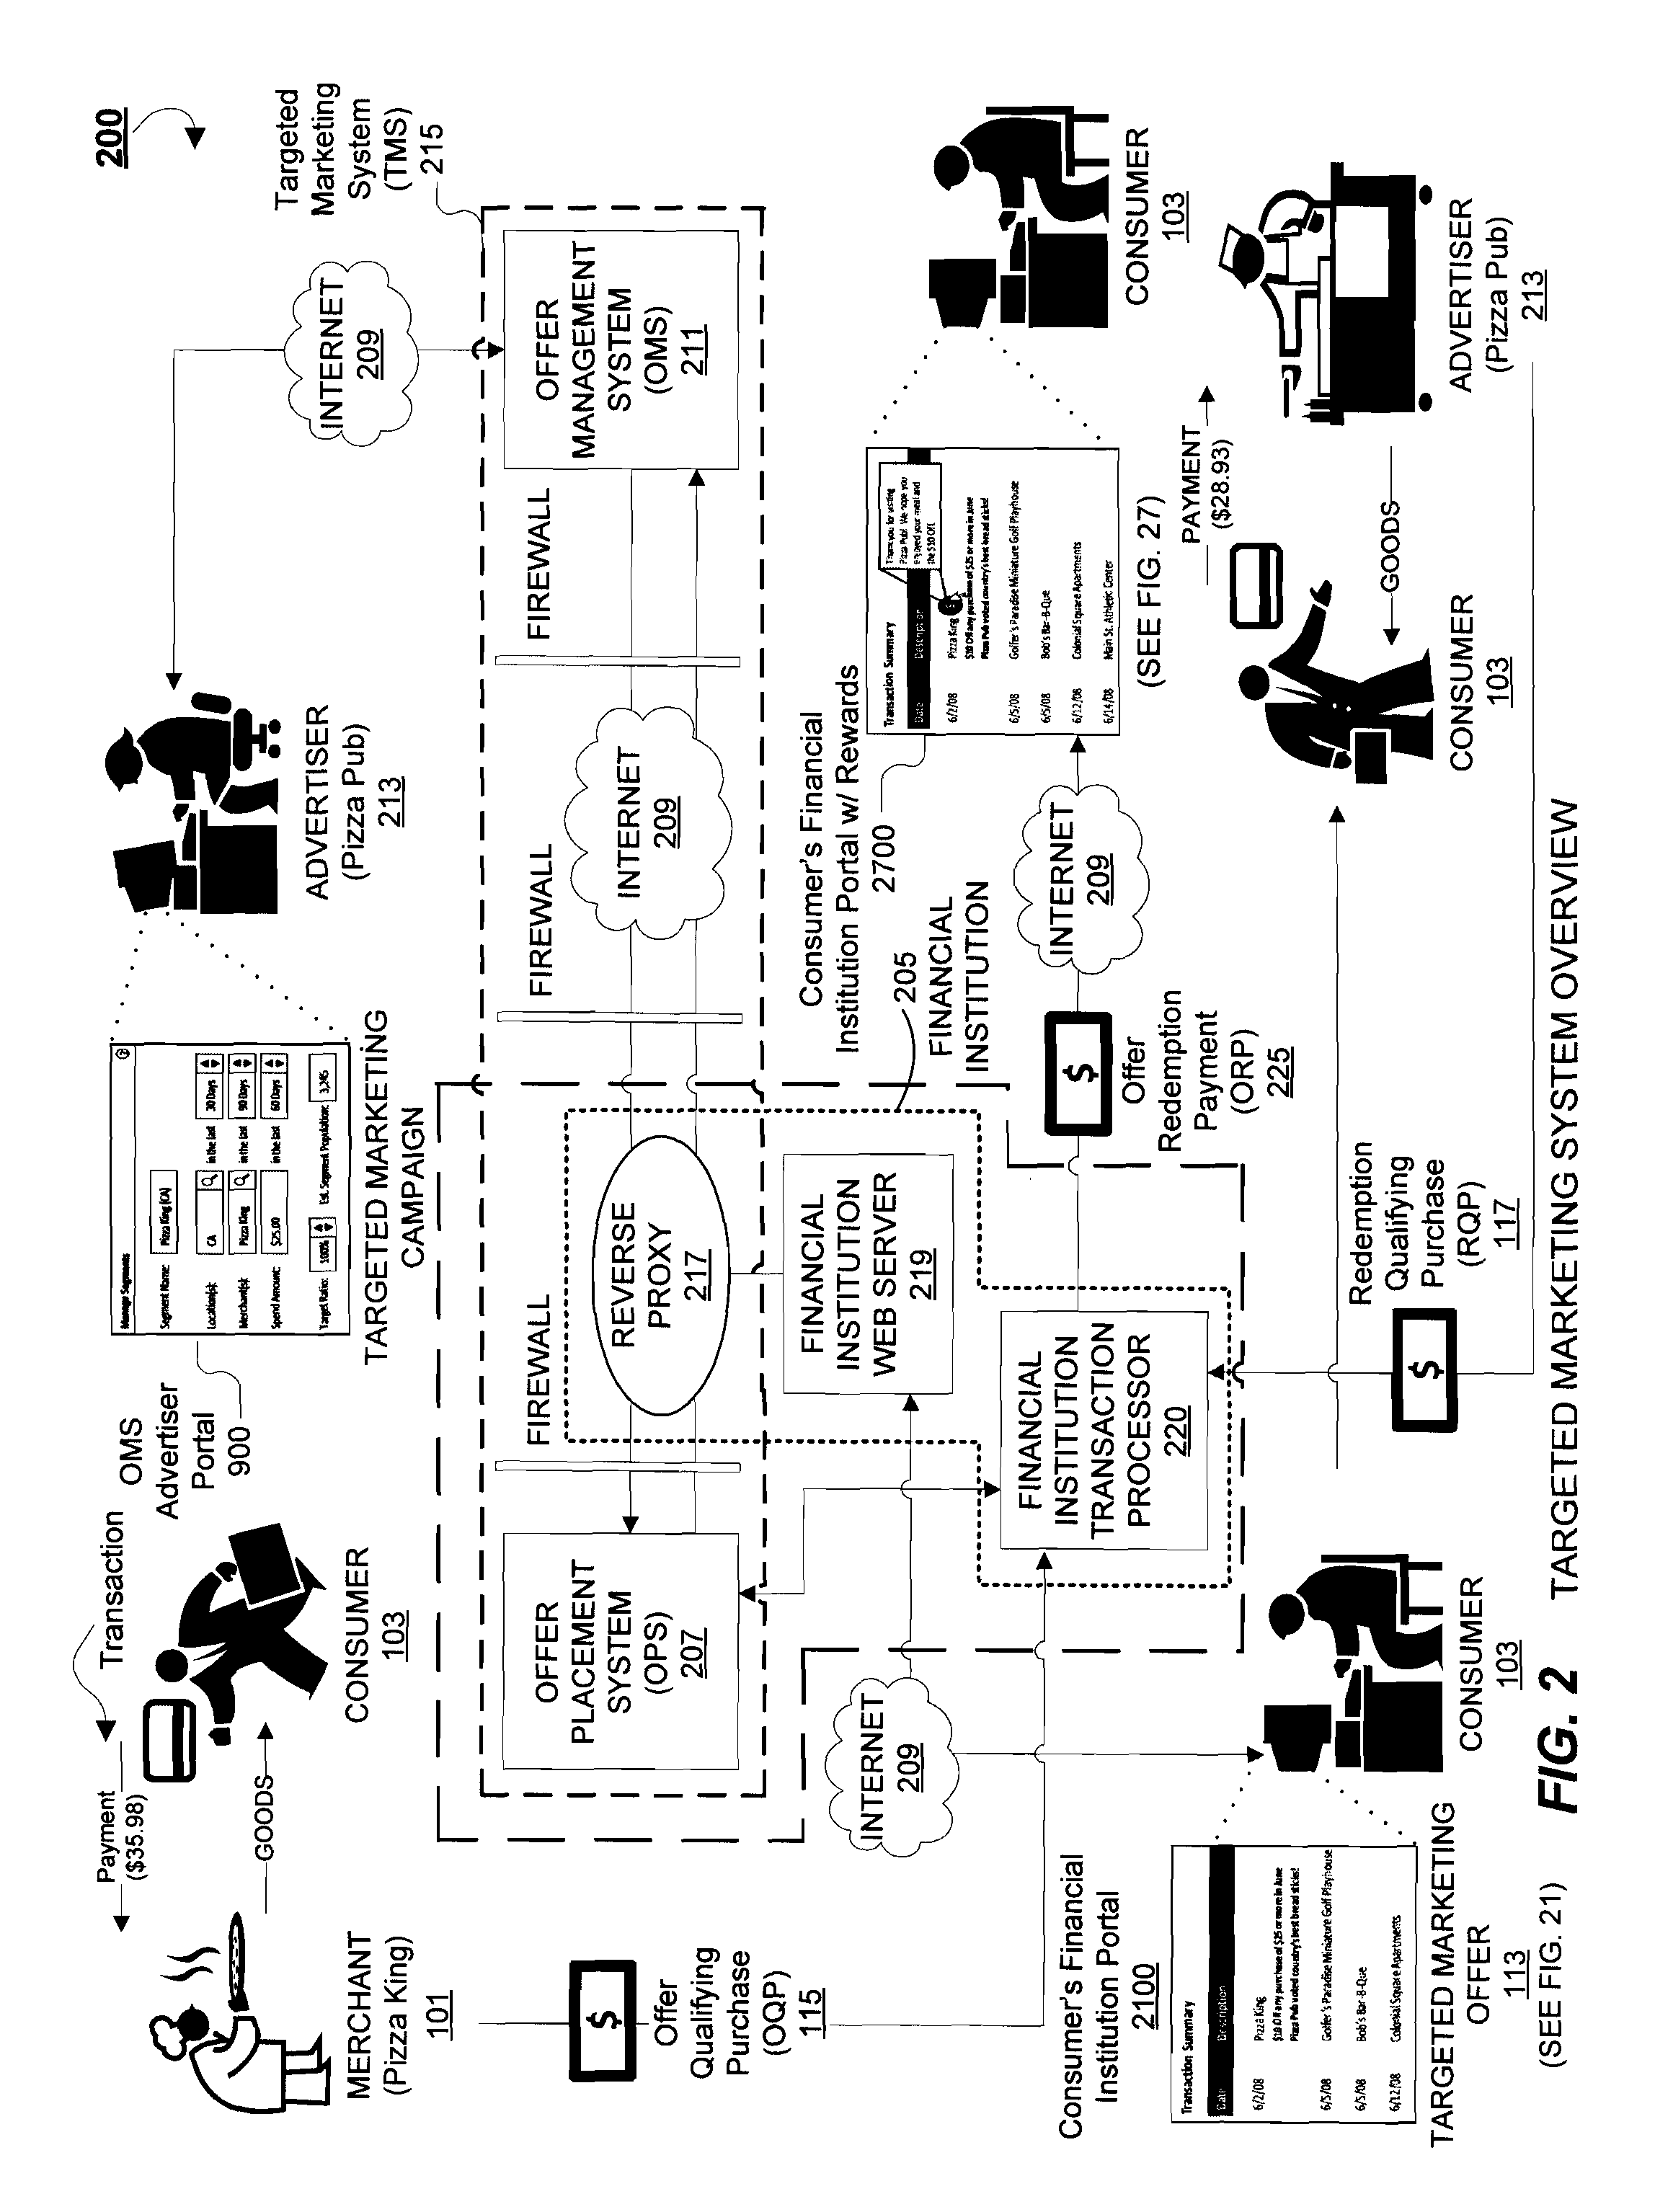 System and methods for merging or injecting targeted marketing offers with a transaction display of an online portal